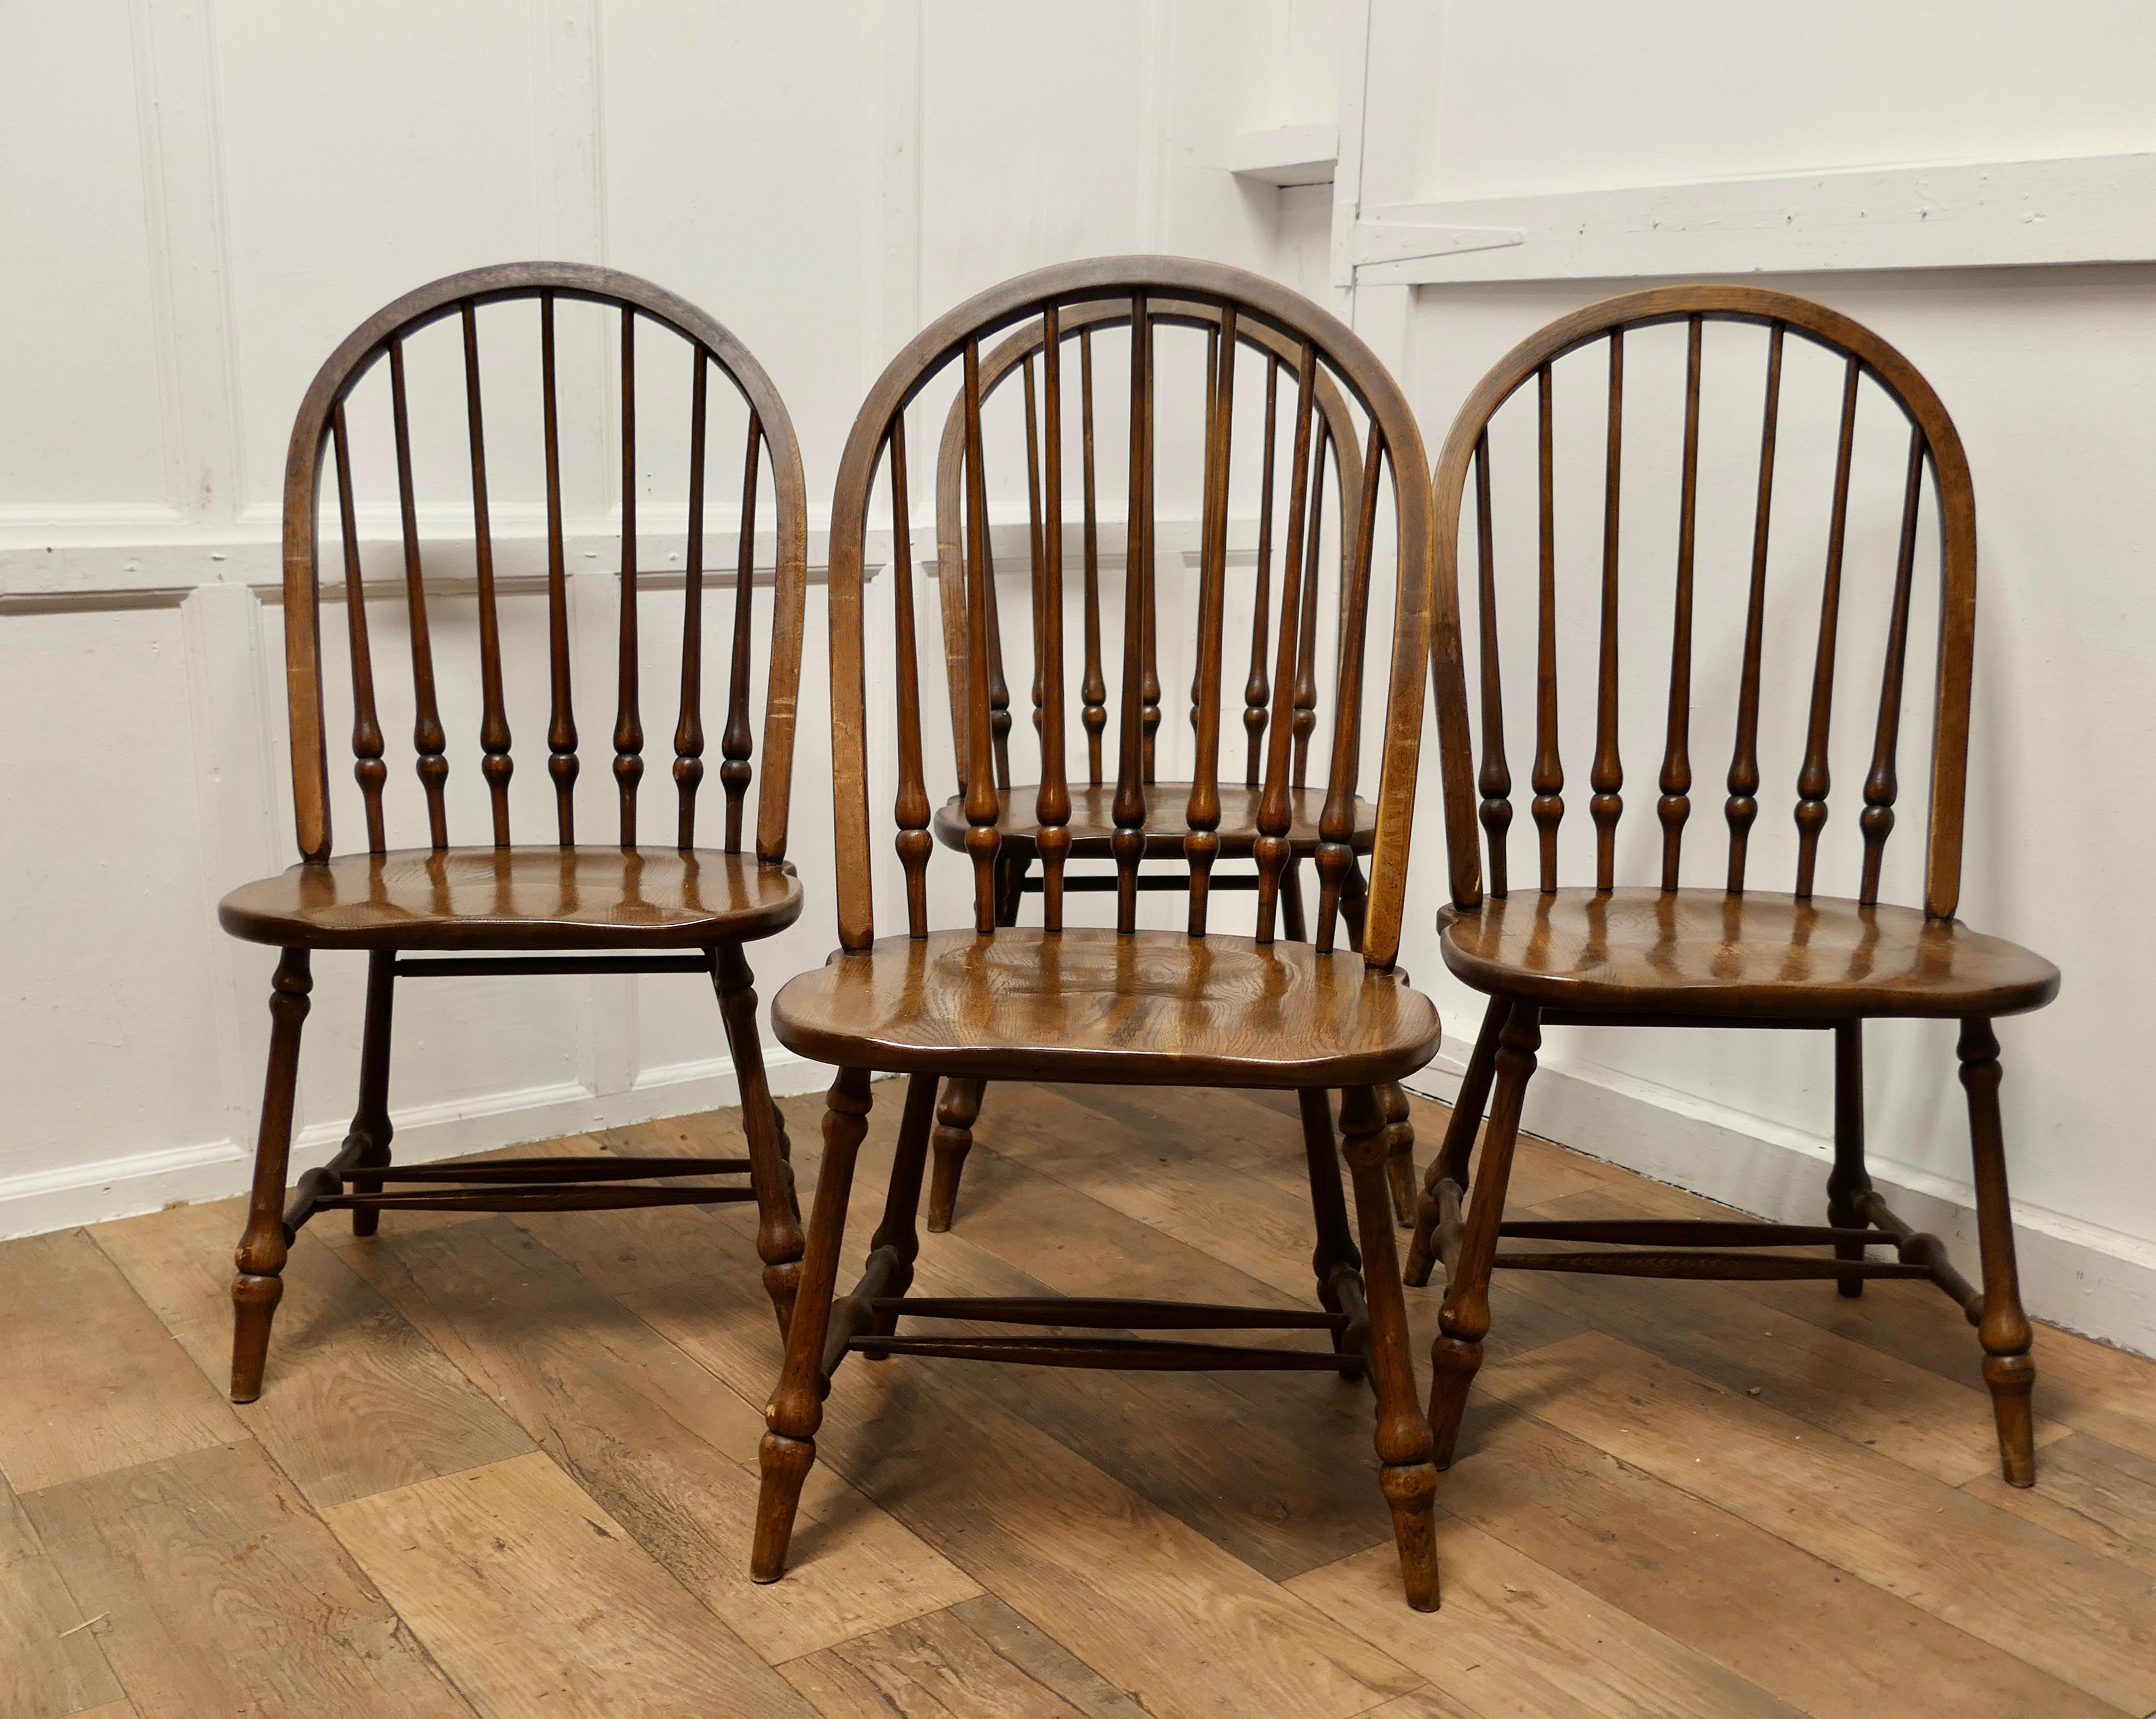 A Set of 4 Large Elm Windsor Country Dining Chairs 

The chairs are of superb quality, they are craftsman made and are very roomy and comfortable The chairs are in solid elm with a hooped back and turned spindles, they have double stretchers beneath